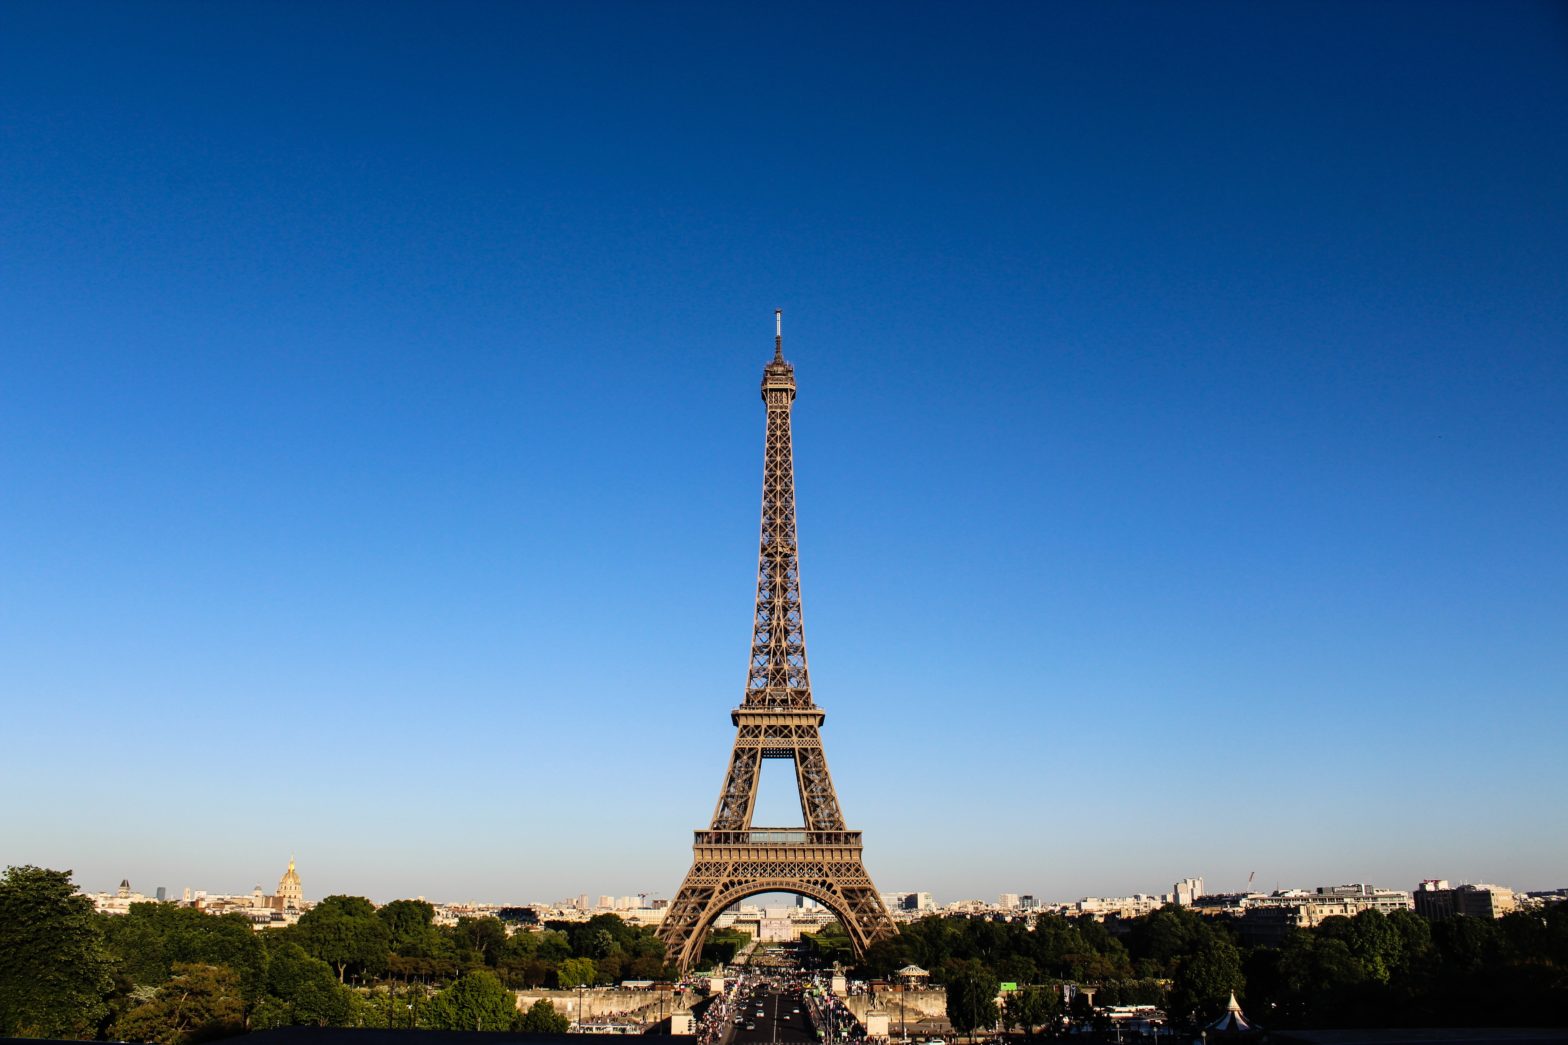 WTTC Ranks Paris As Most Powerful Tourism City In The World